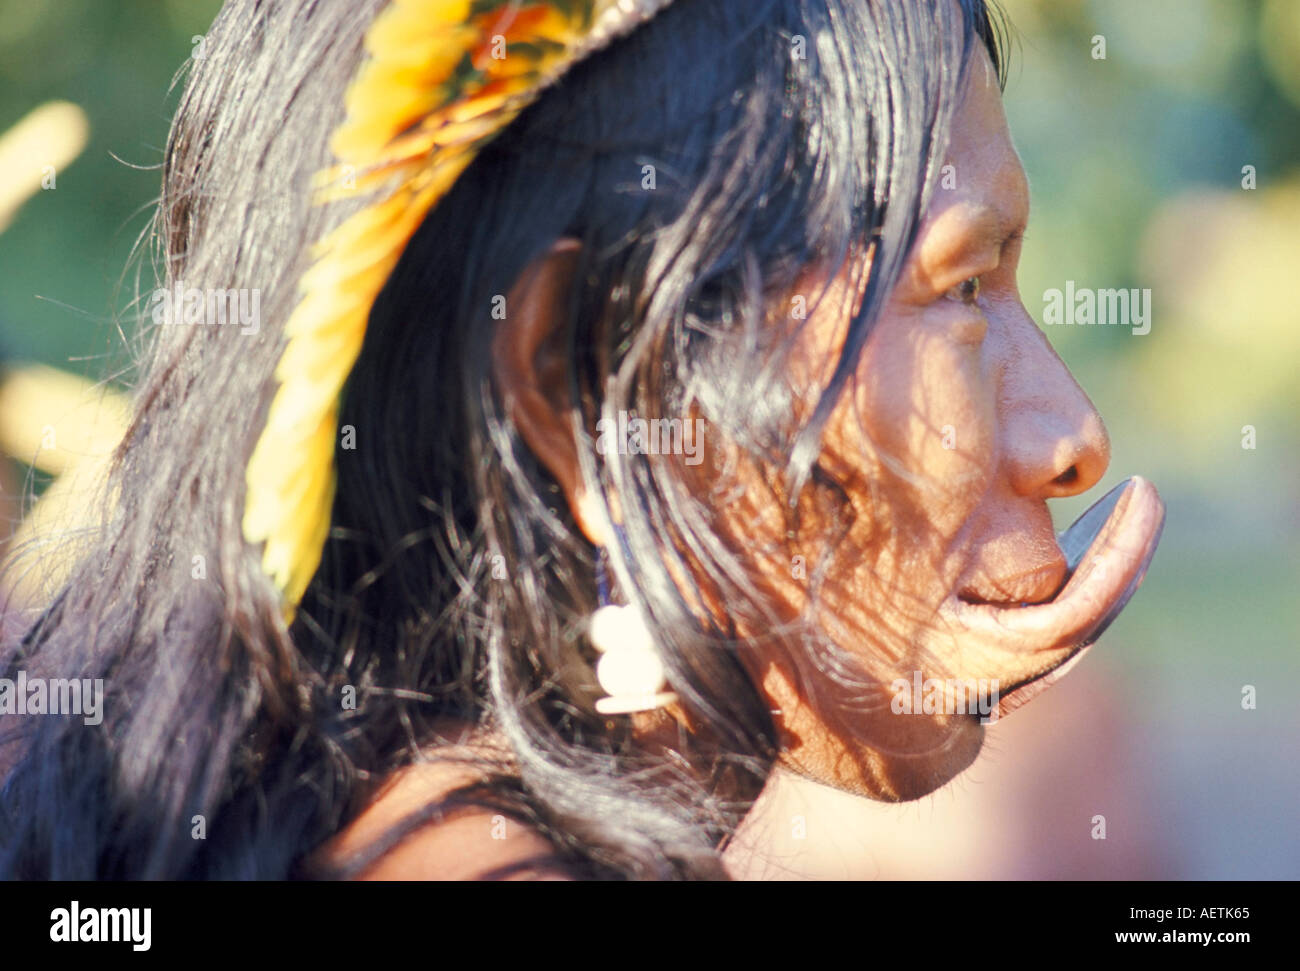 Portrait of a Suya Indian with lip plate Brazil South America Stock Photo